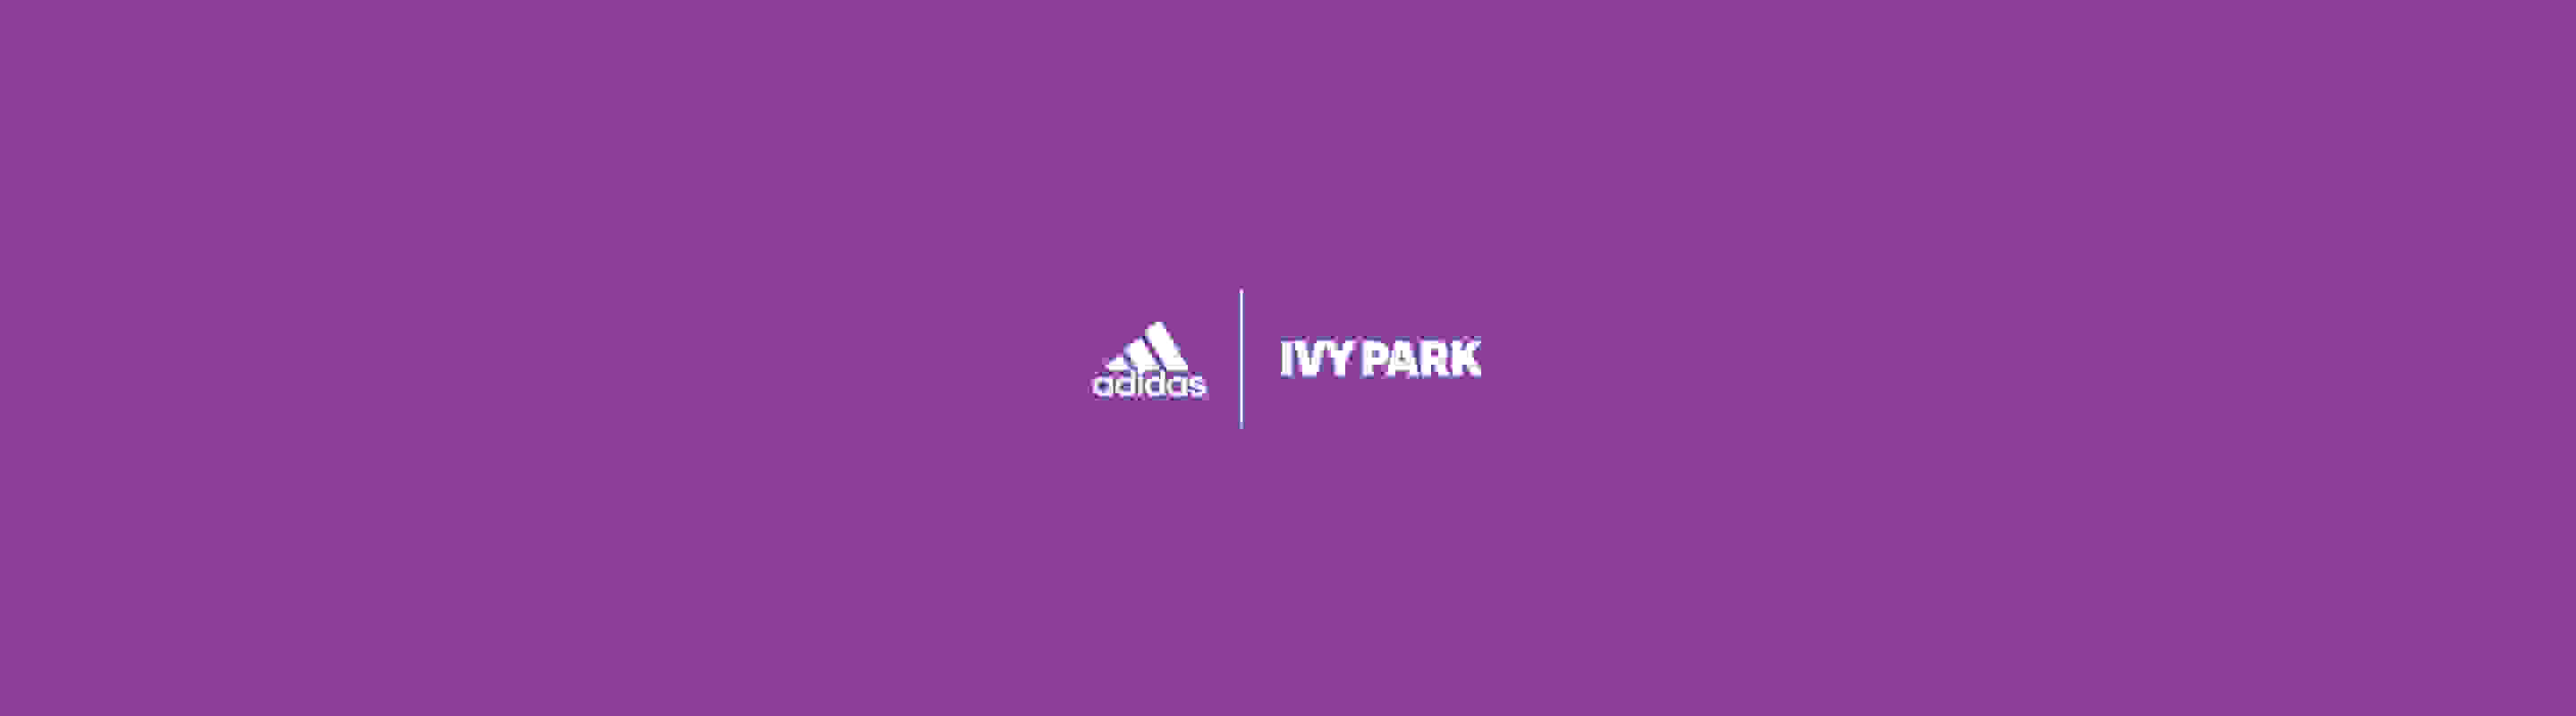 The adidas and IVY PARK logos are dispalyed against a purple background along with the words PARK TRAIL and numbers 2.9.2023.